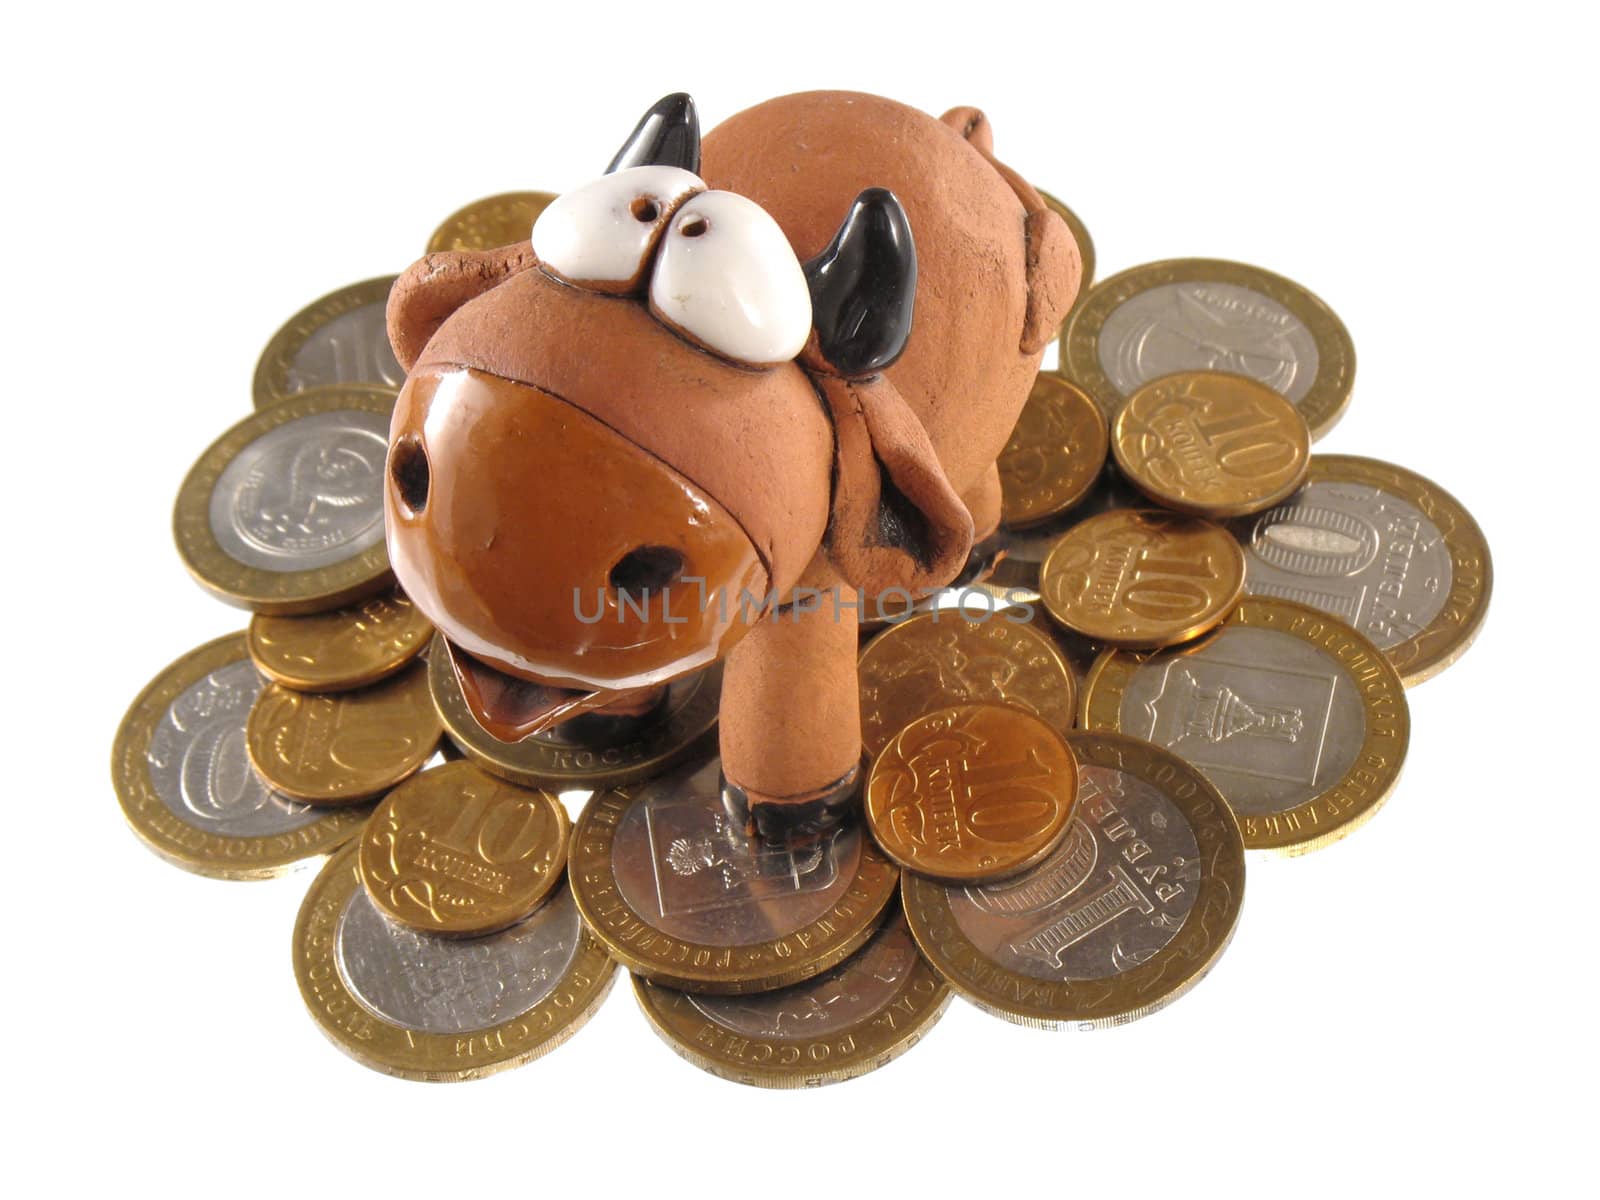 Ceramic bull or cow on the heap of coins, isolated.